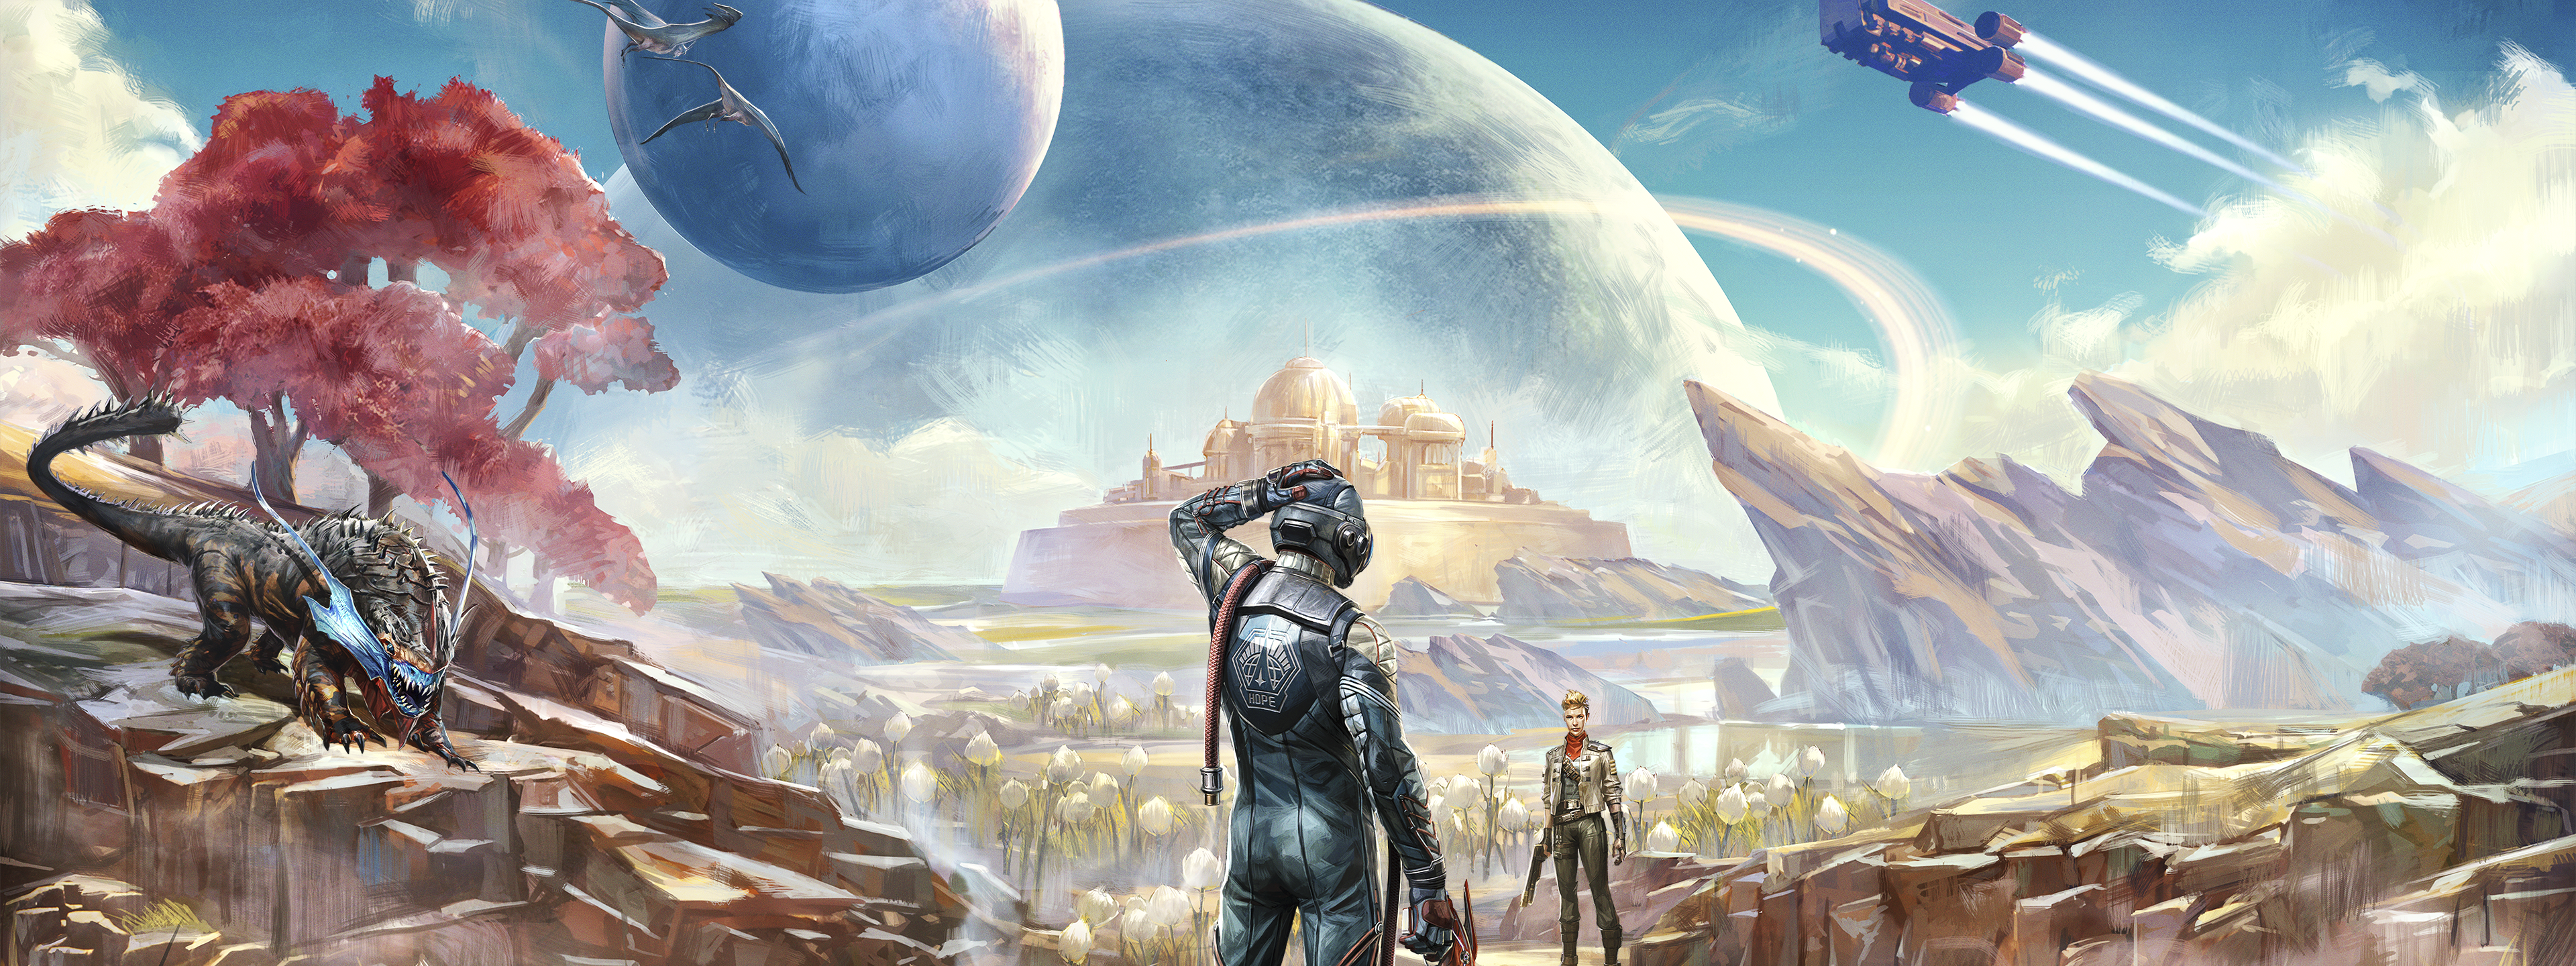 The Outer Worlds: - Key art